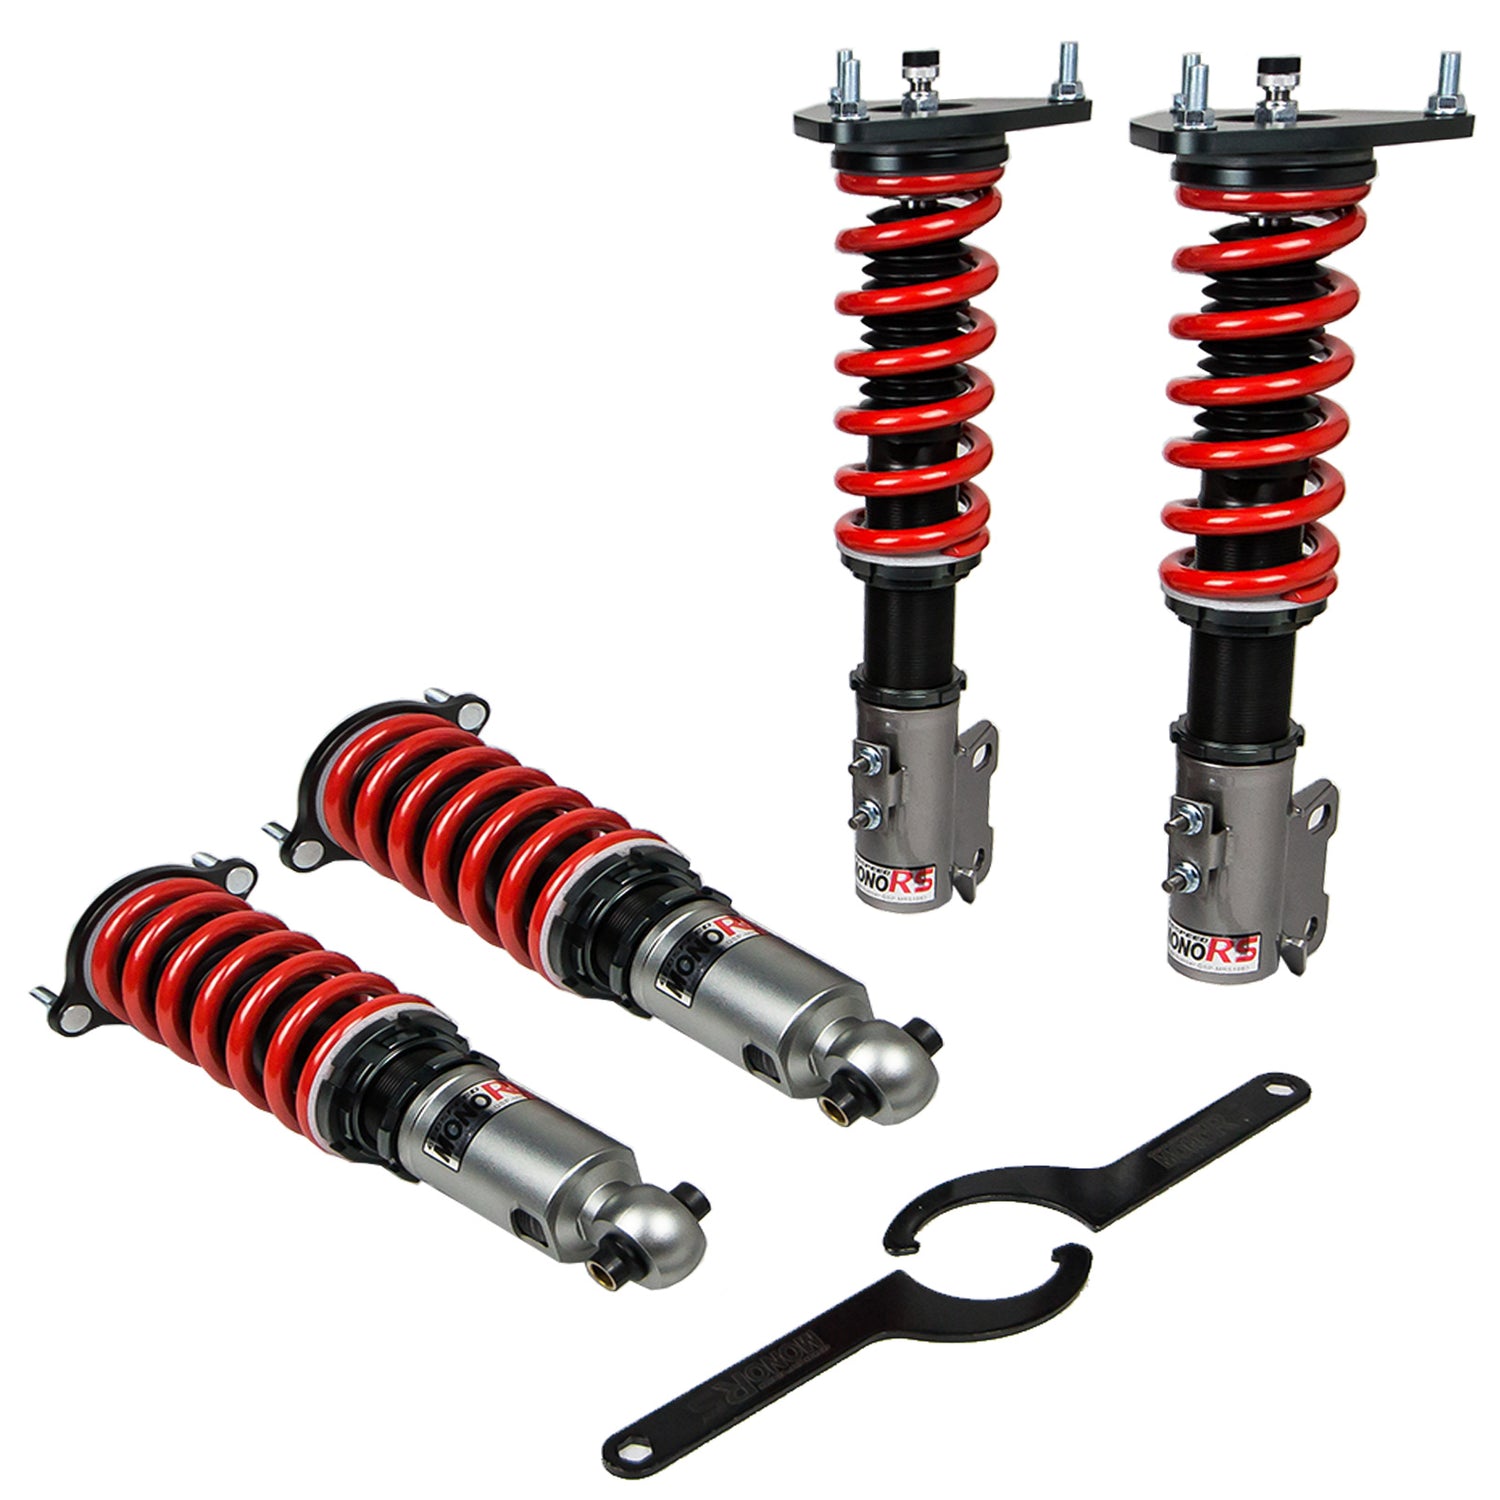 Godspeed MRS1980-B MonoRS Coilover Lowering Kit, 32 Damping Adjustment, Ride Height Adjustable